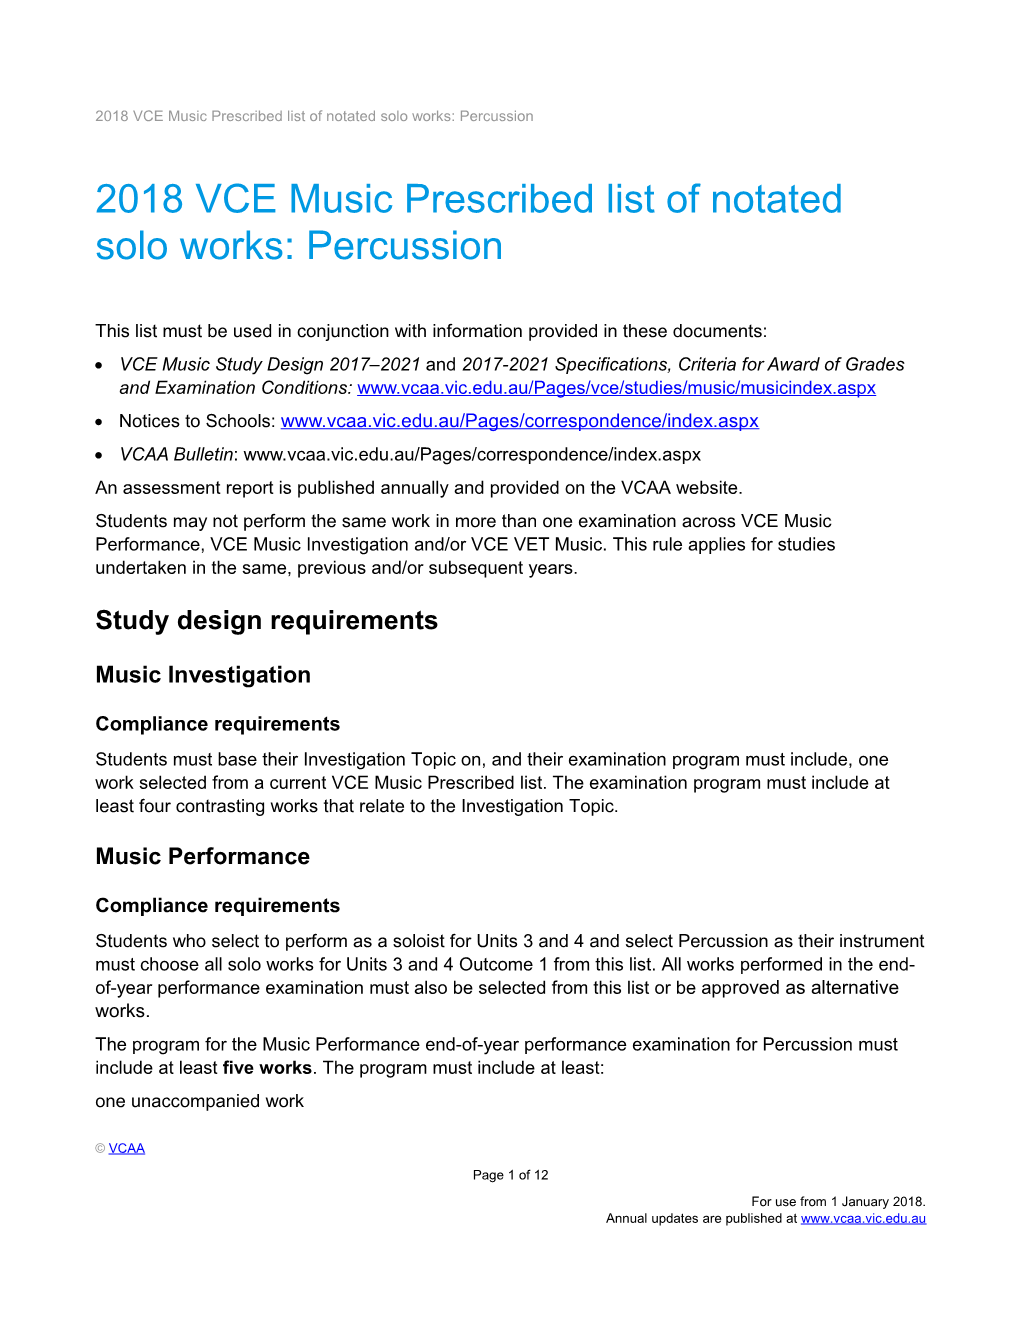 2018 VCE Music Prescribed List of Notated Solo Works: Percussion